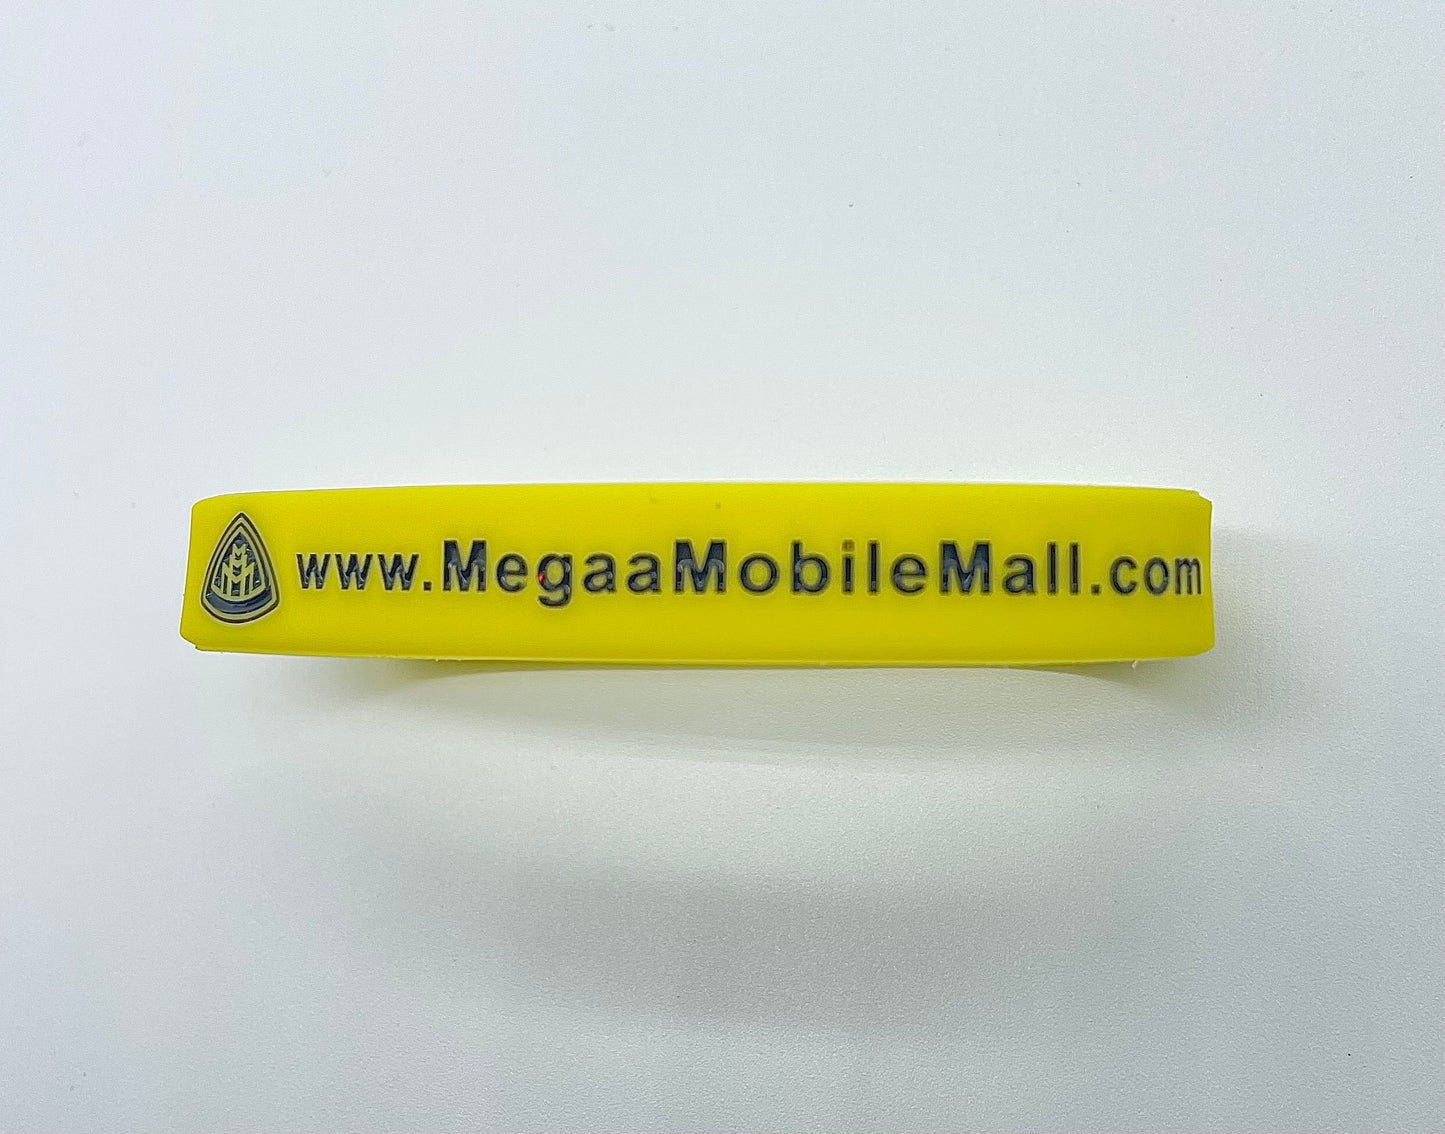 megaamobilemall wrist bands available in yellow